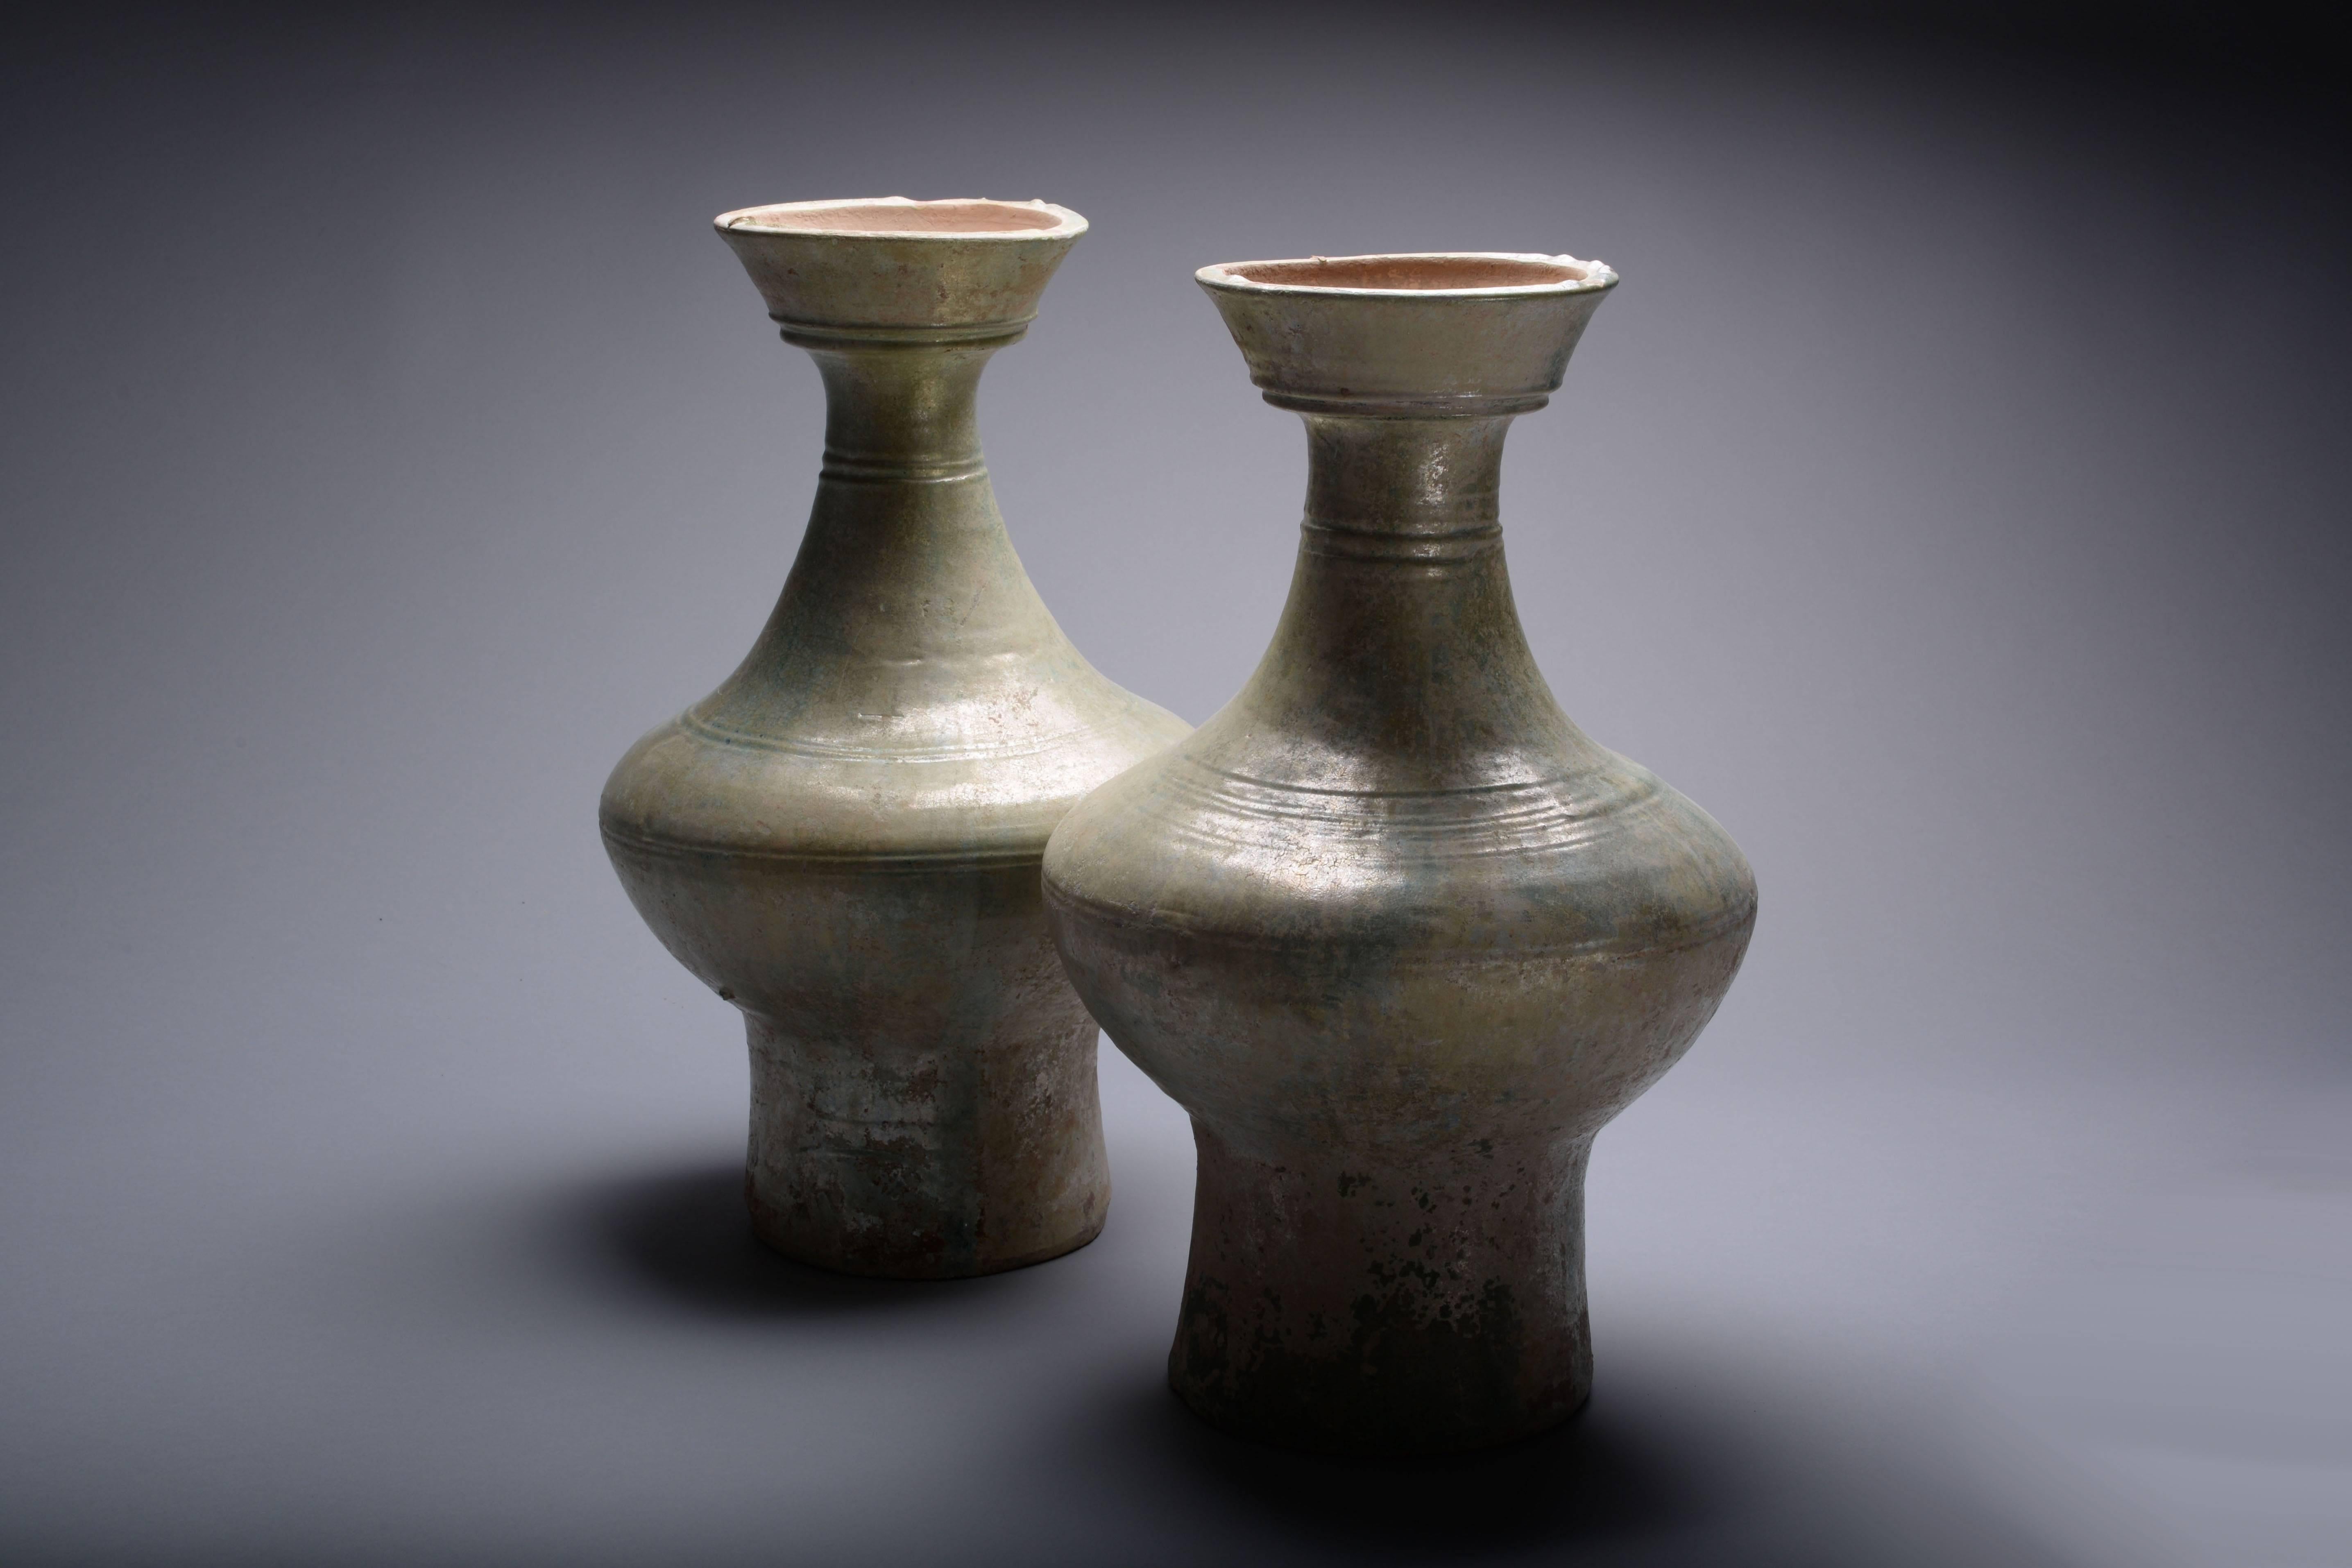 A superb pair of large ancient Chinese green glazed vases, dating to China's Han dynasty, circa 206 BC - 220 AD.

Of undulating, elegant form, the piriform bodies glisten with a silvery green glaze. 

These beautiful vases were used as storage